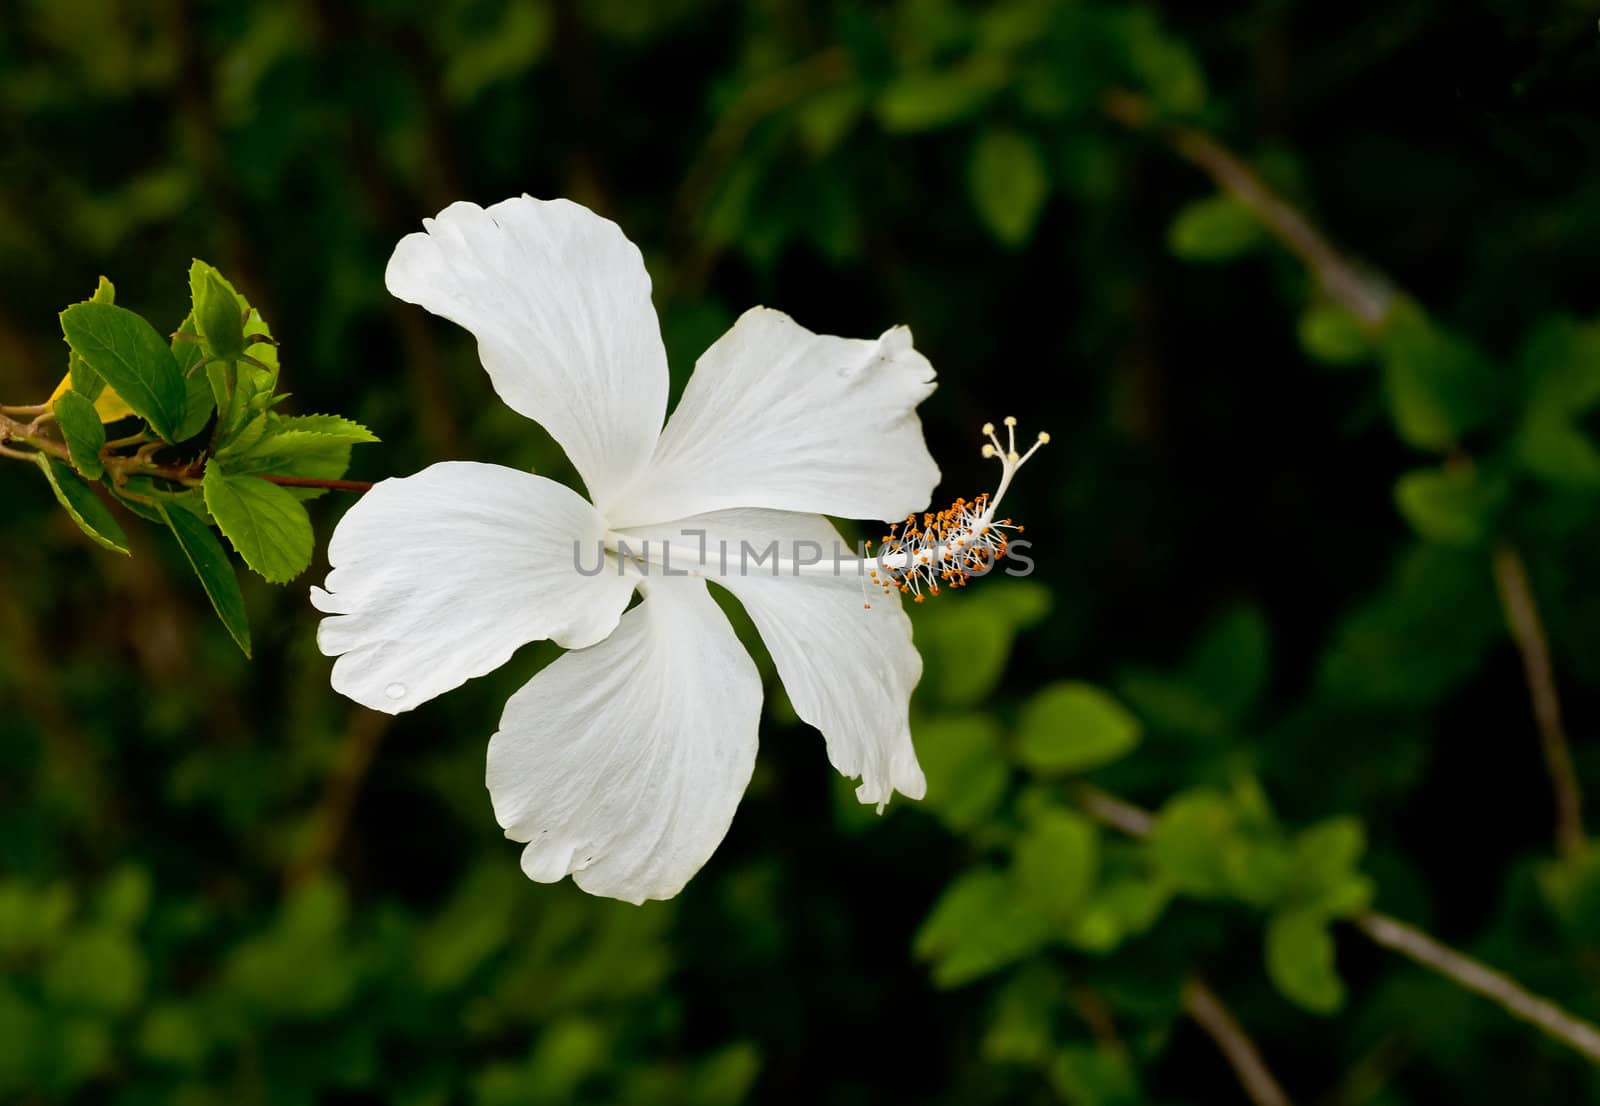 A white hibiscus flower at full bloom on an overcast day